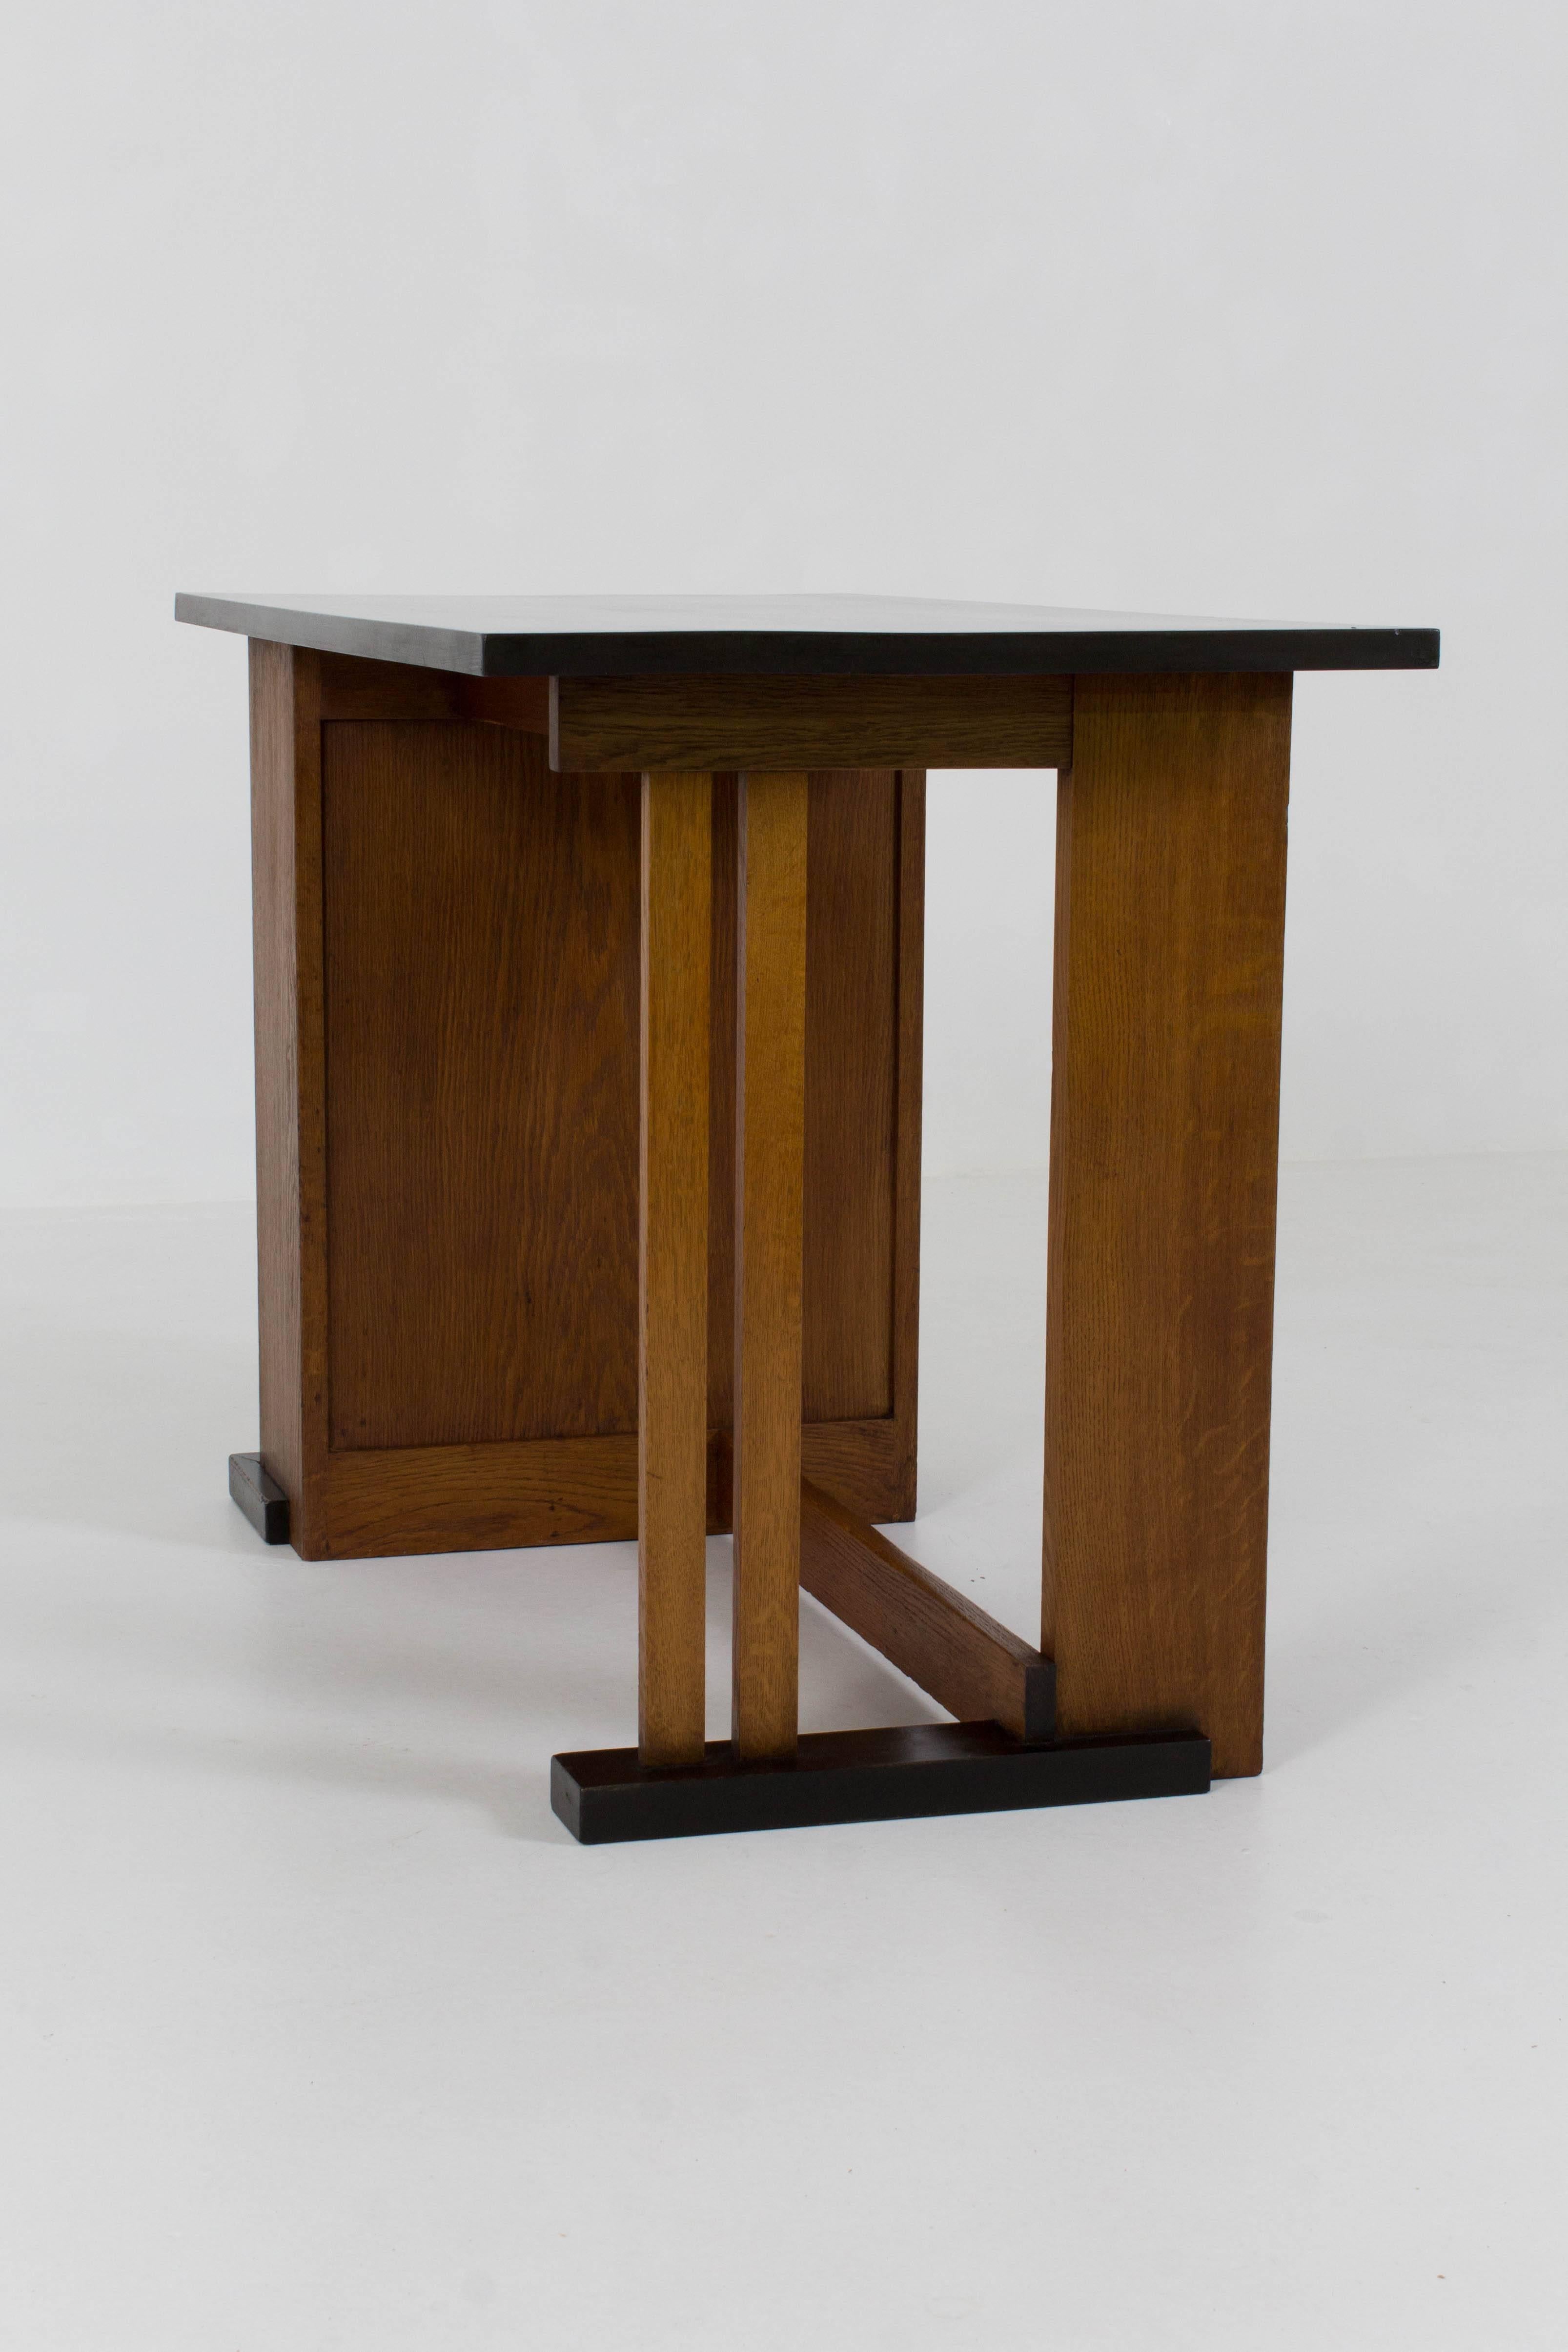 Dutch Important and Rare Art Deco Haagse School Desk by Cor Alons for L.O.V.